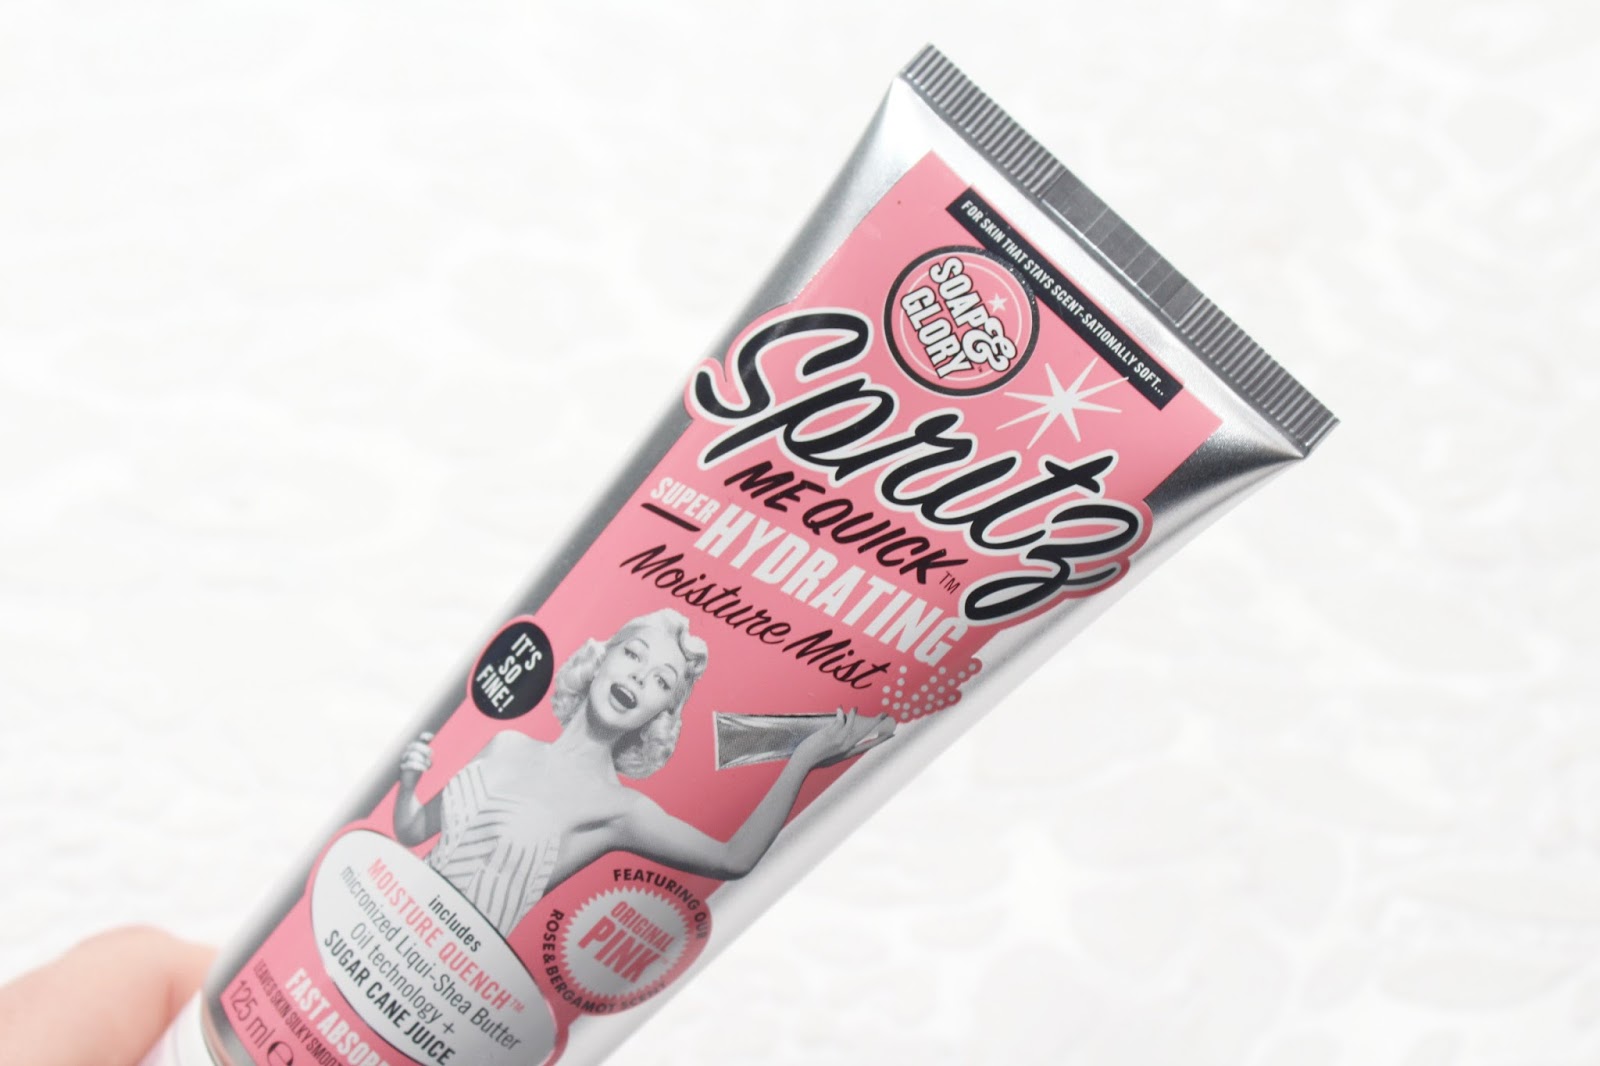 Soap and Glory Spritz Me Quick Hydrating Moisture Mist